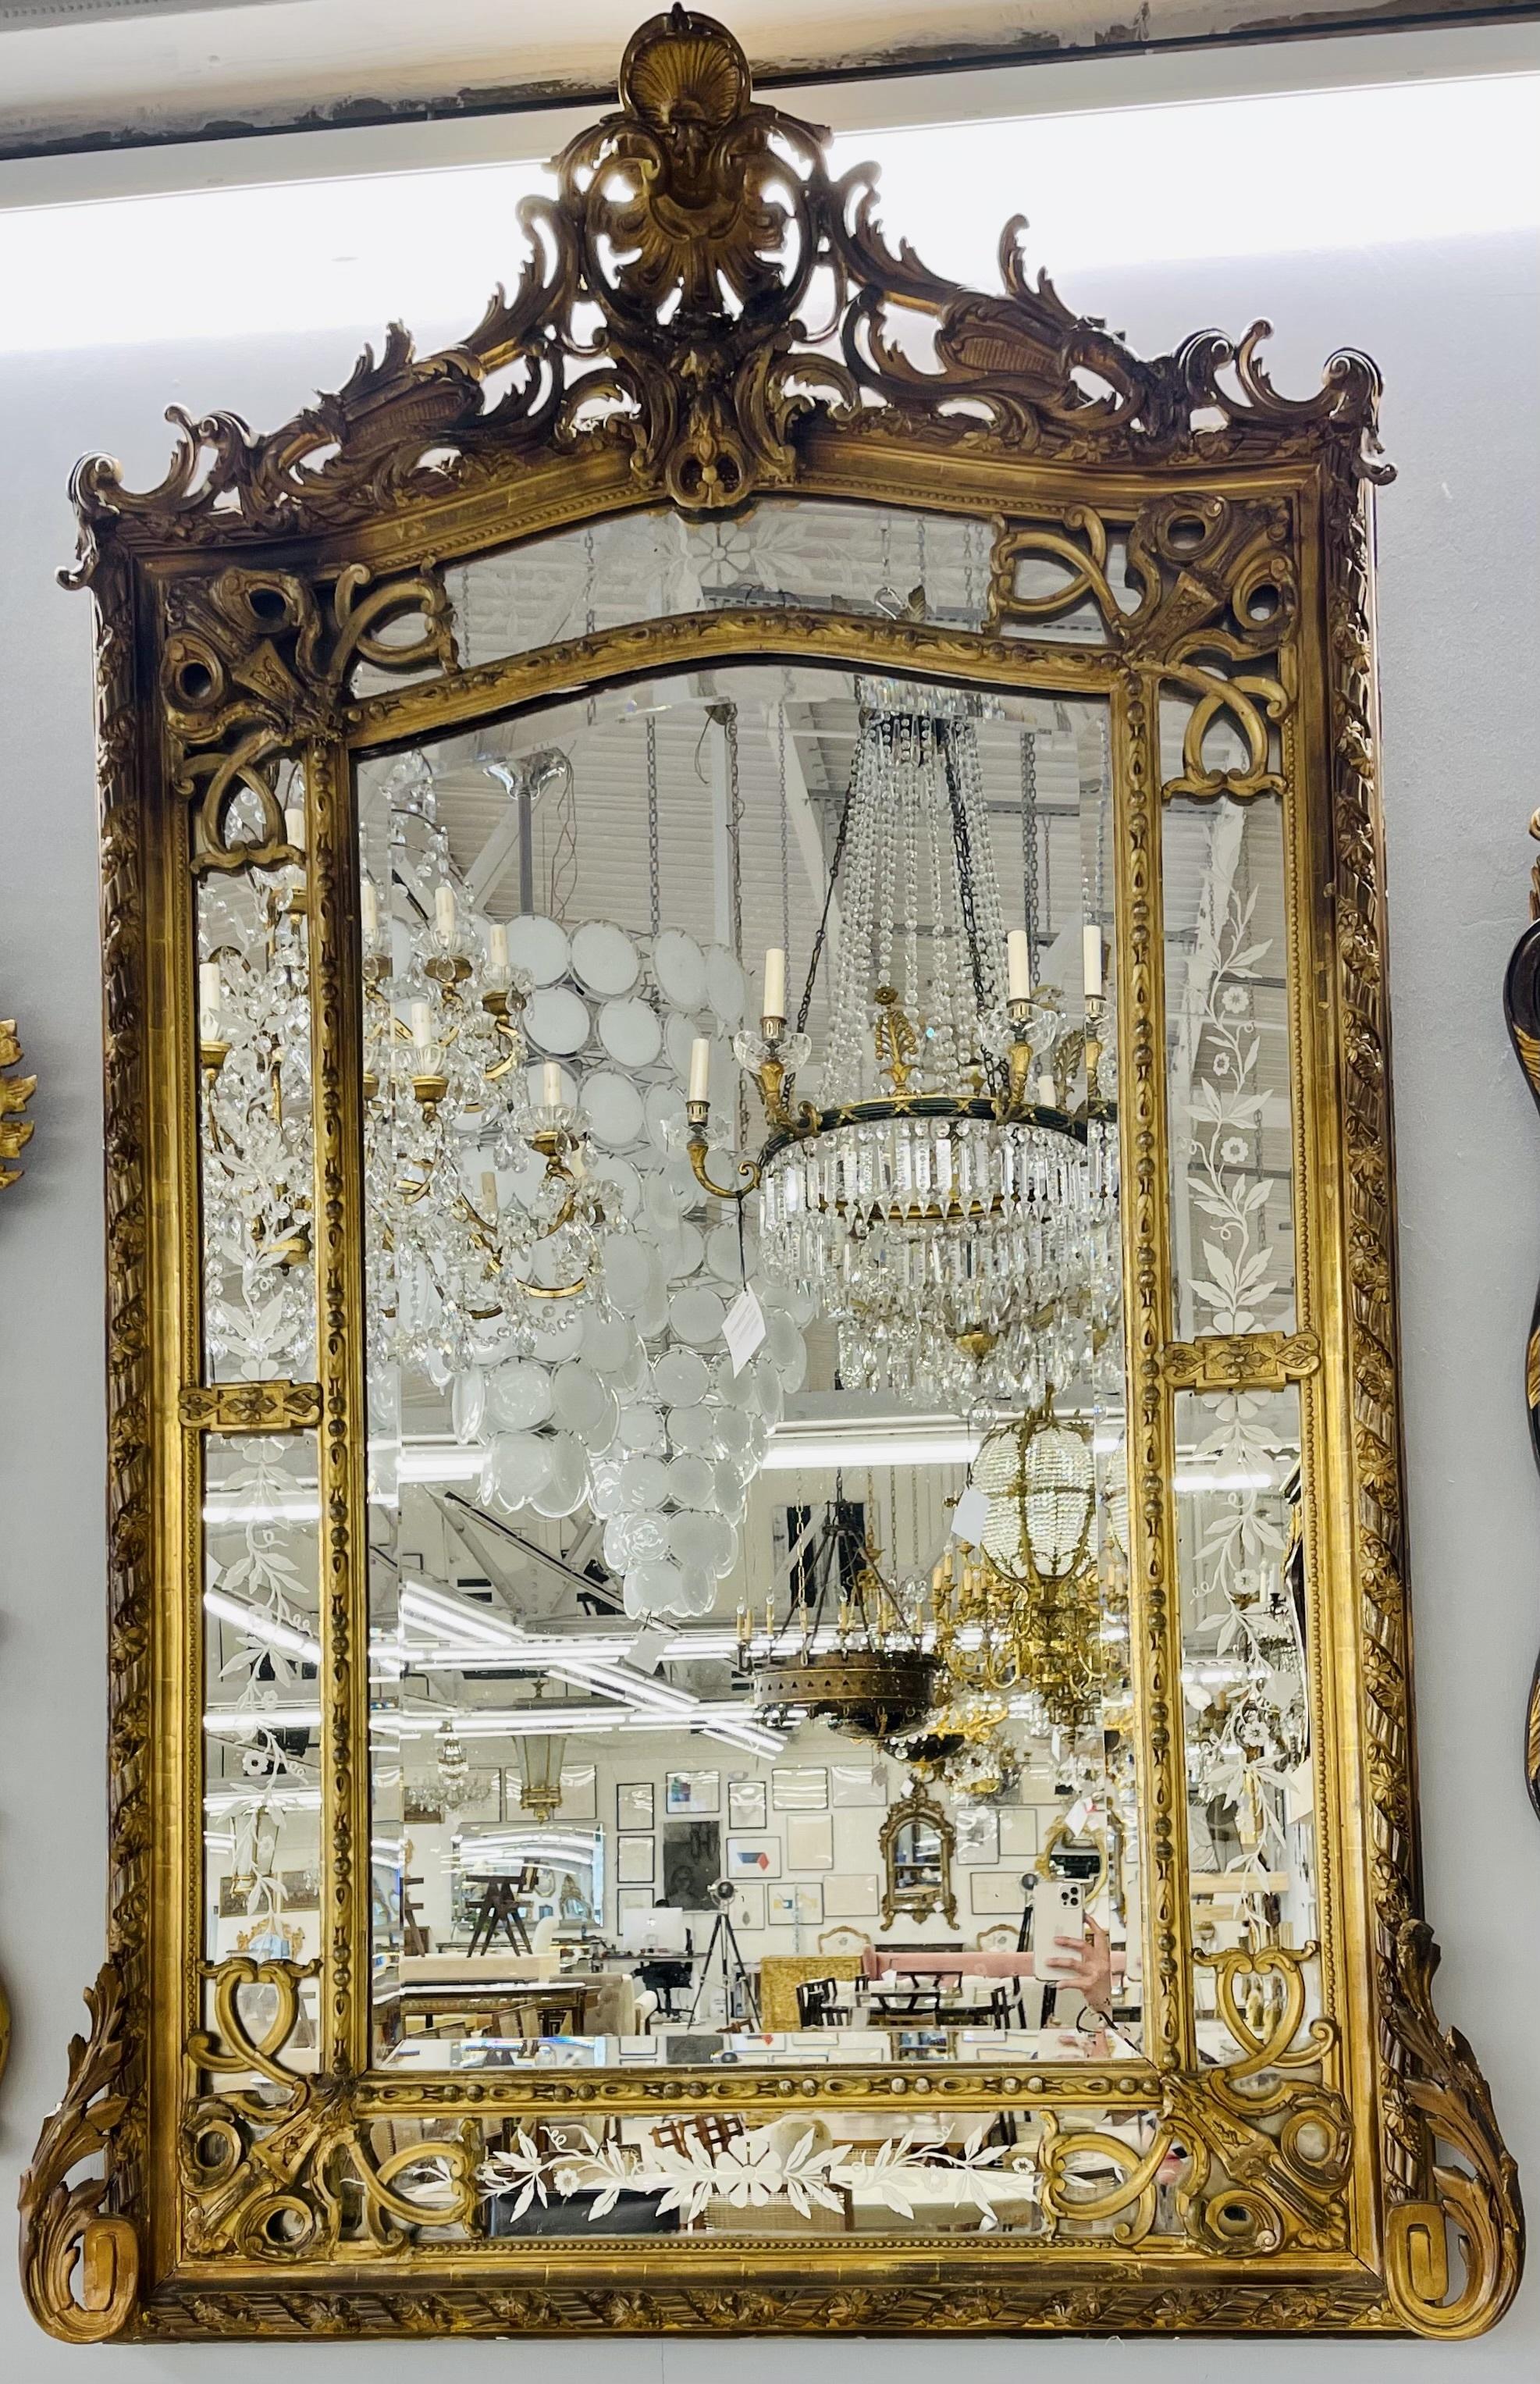 French Designer, Beaux Arts, Large Wall Mirror, Gilded Carved Wood, Gesso, 1890s For Sale 1